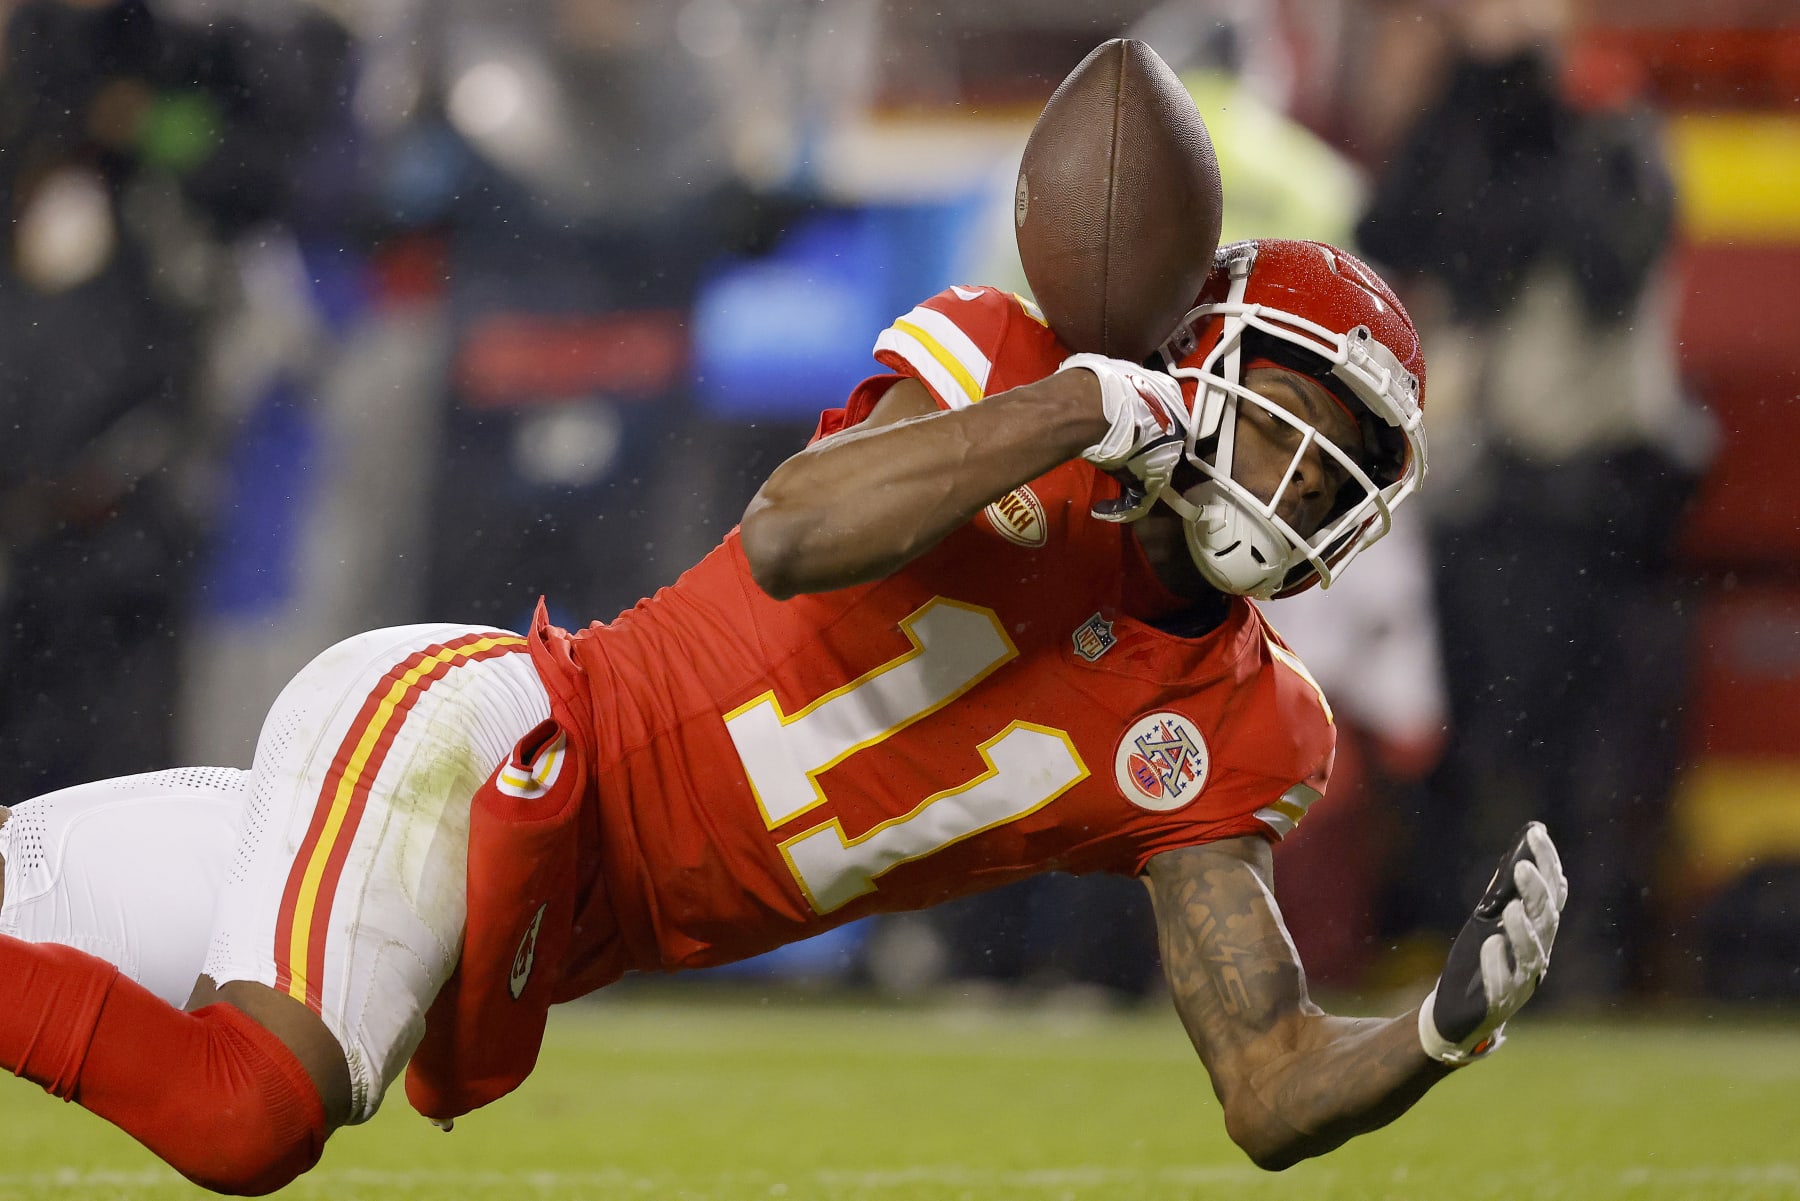 chiefs-marquez-valdes-scantling-vows-to-improve-after-game-losing-drop